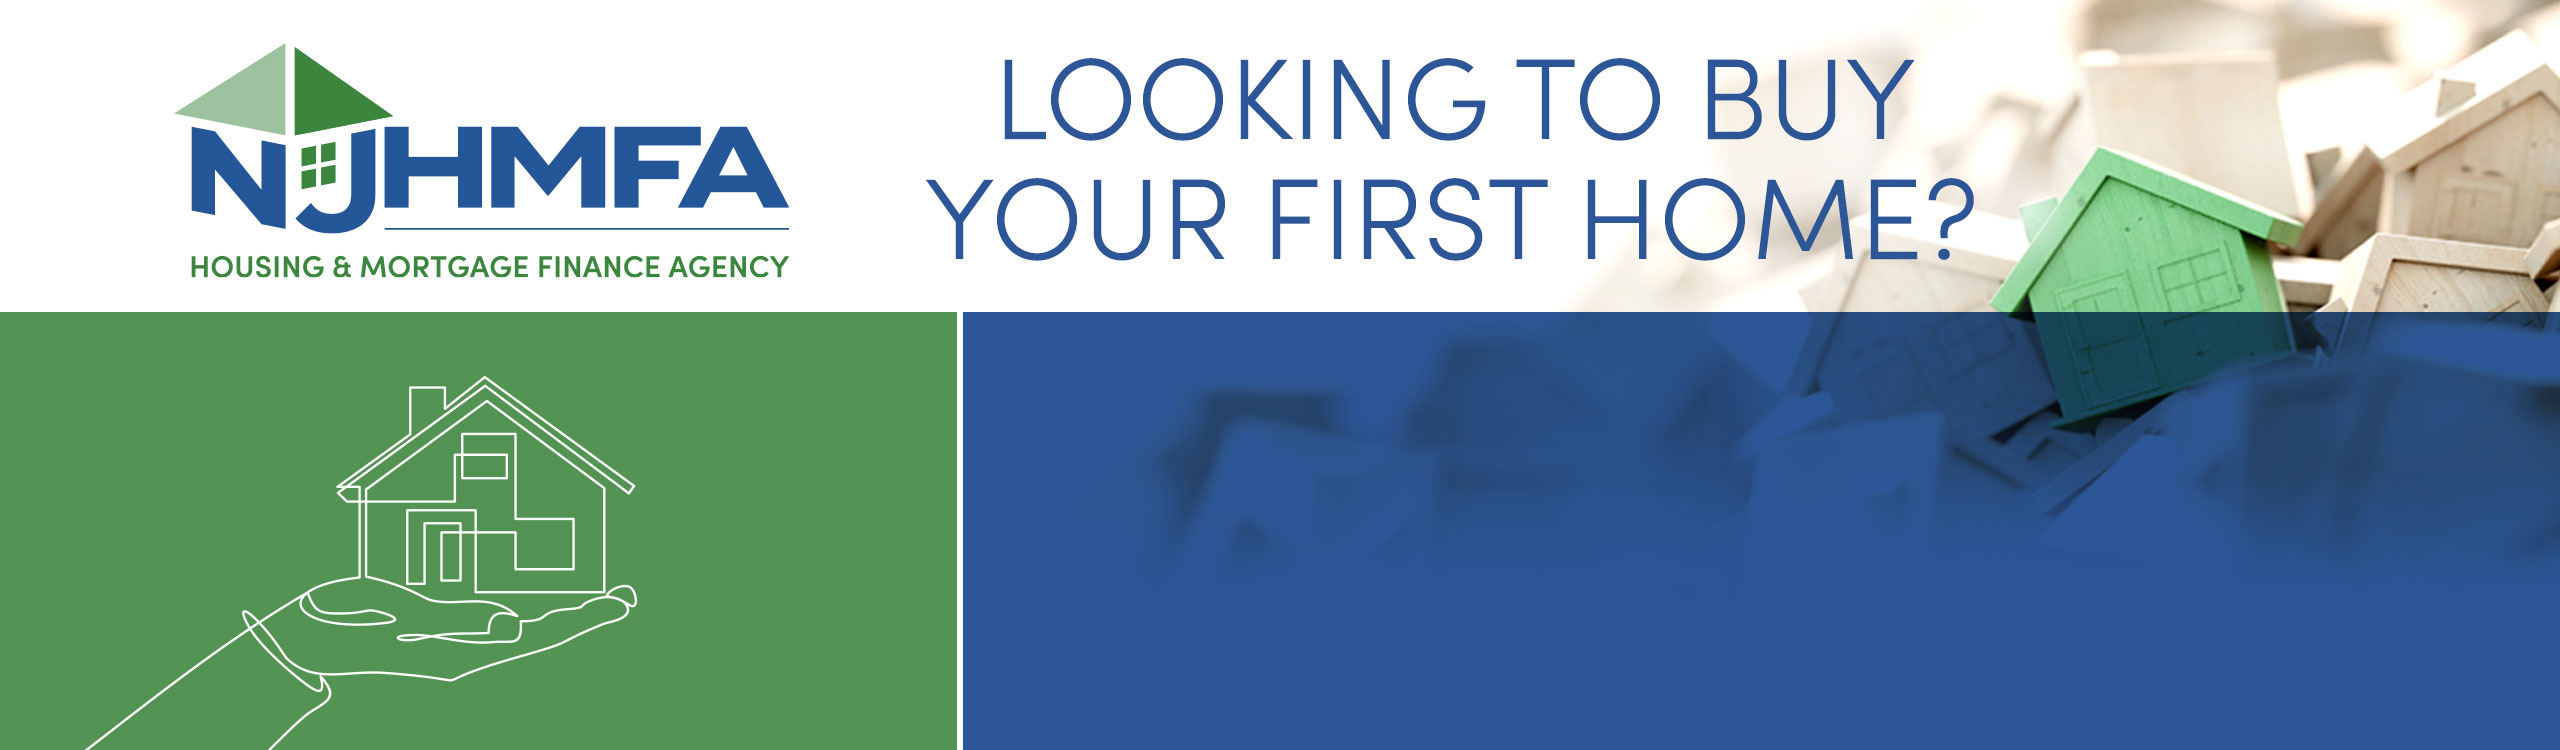 Looking to buy your first home?